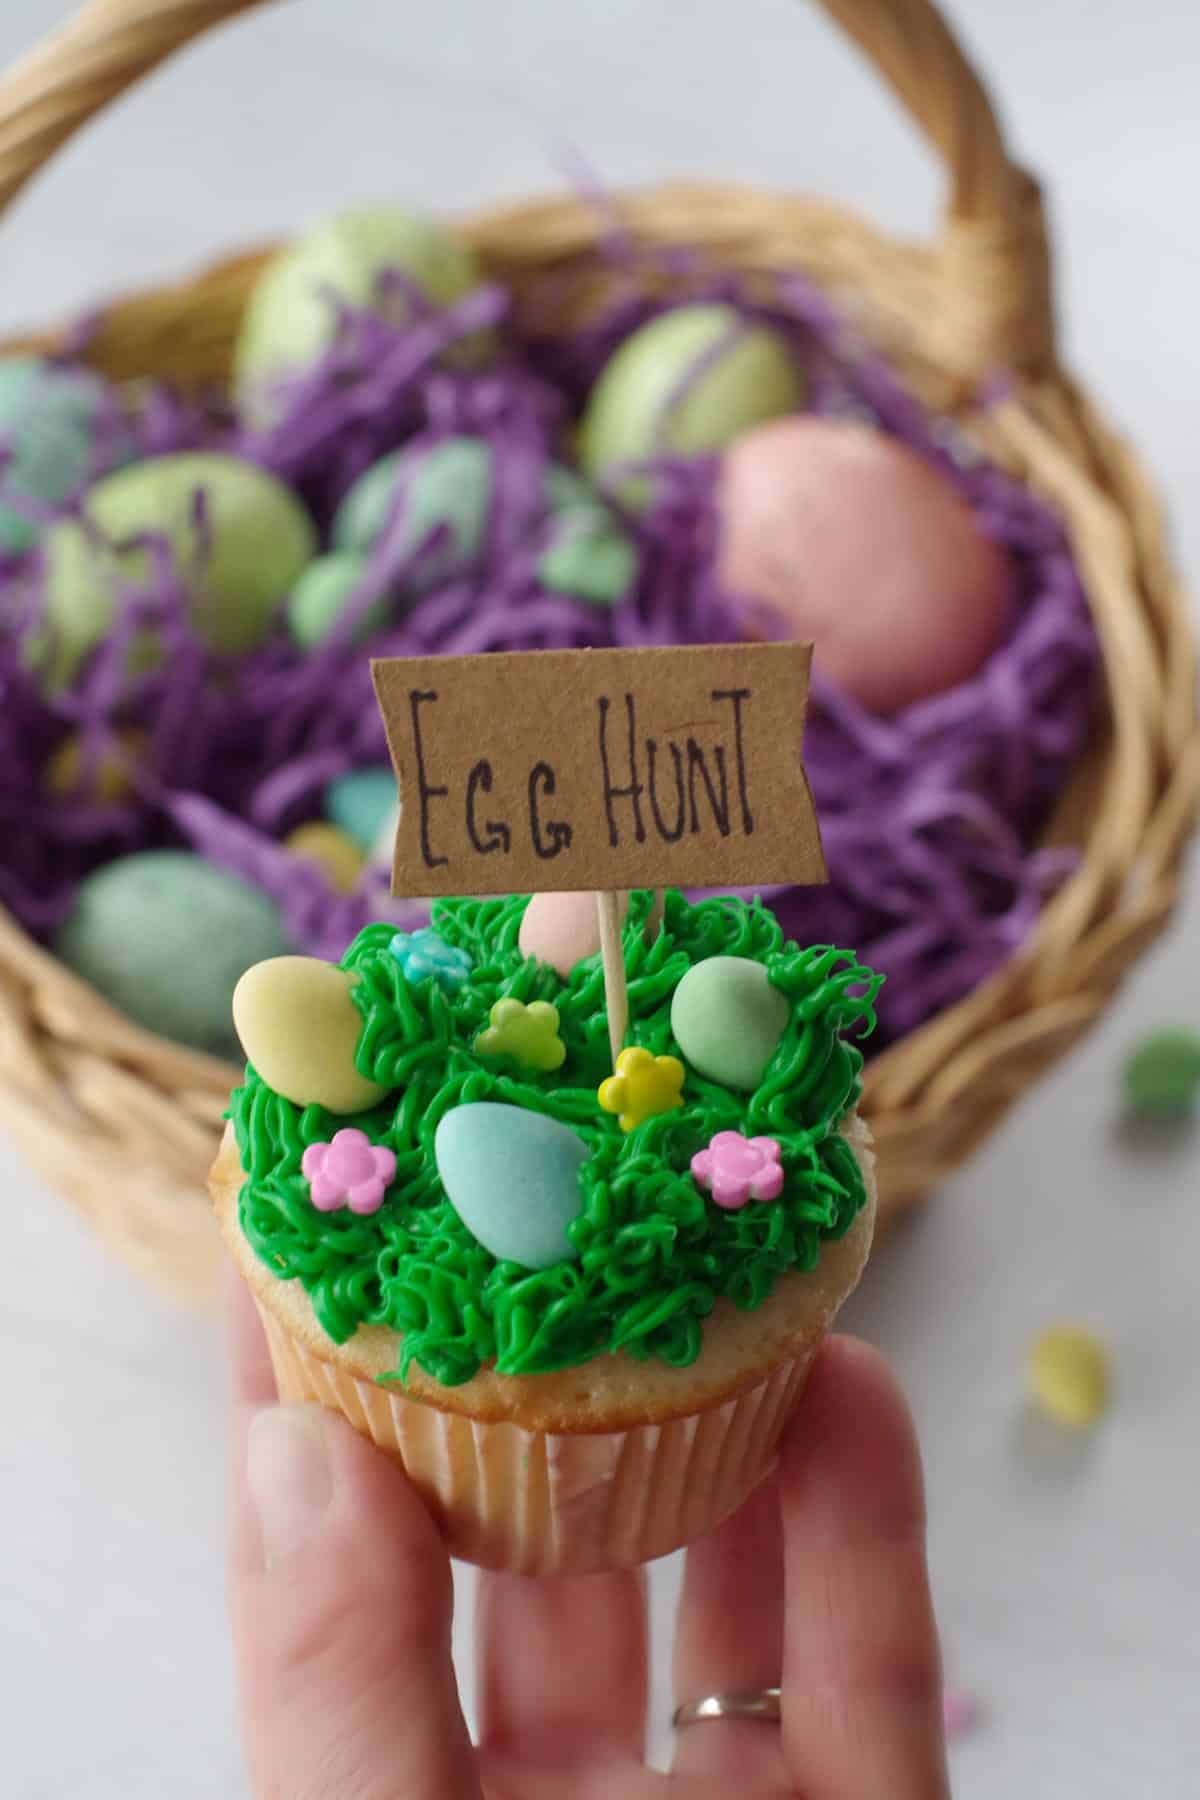 Easter Mini Egg cupcake being held up in front of an Easter egg basket.